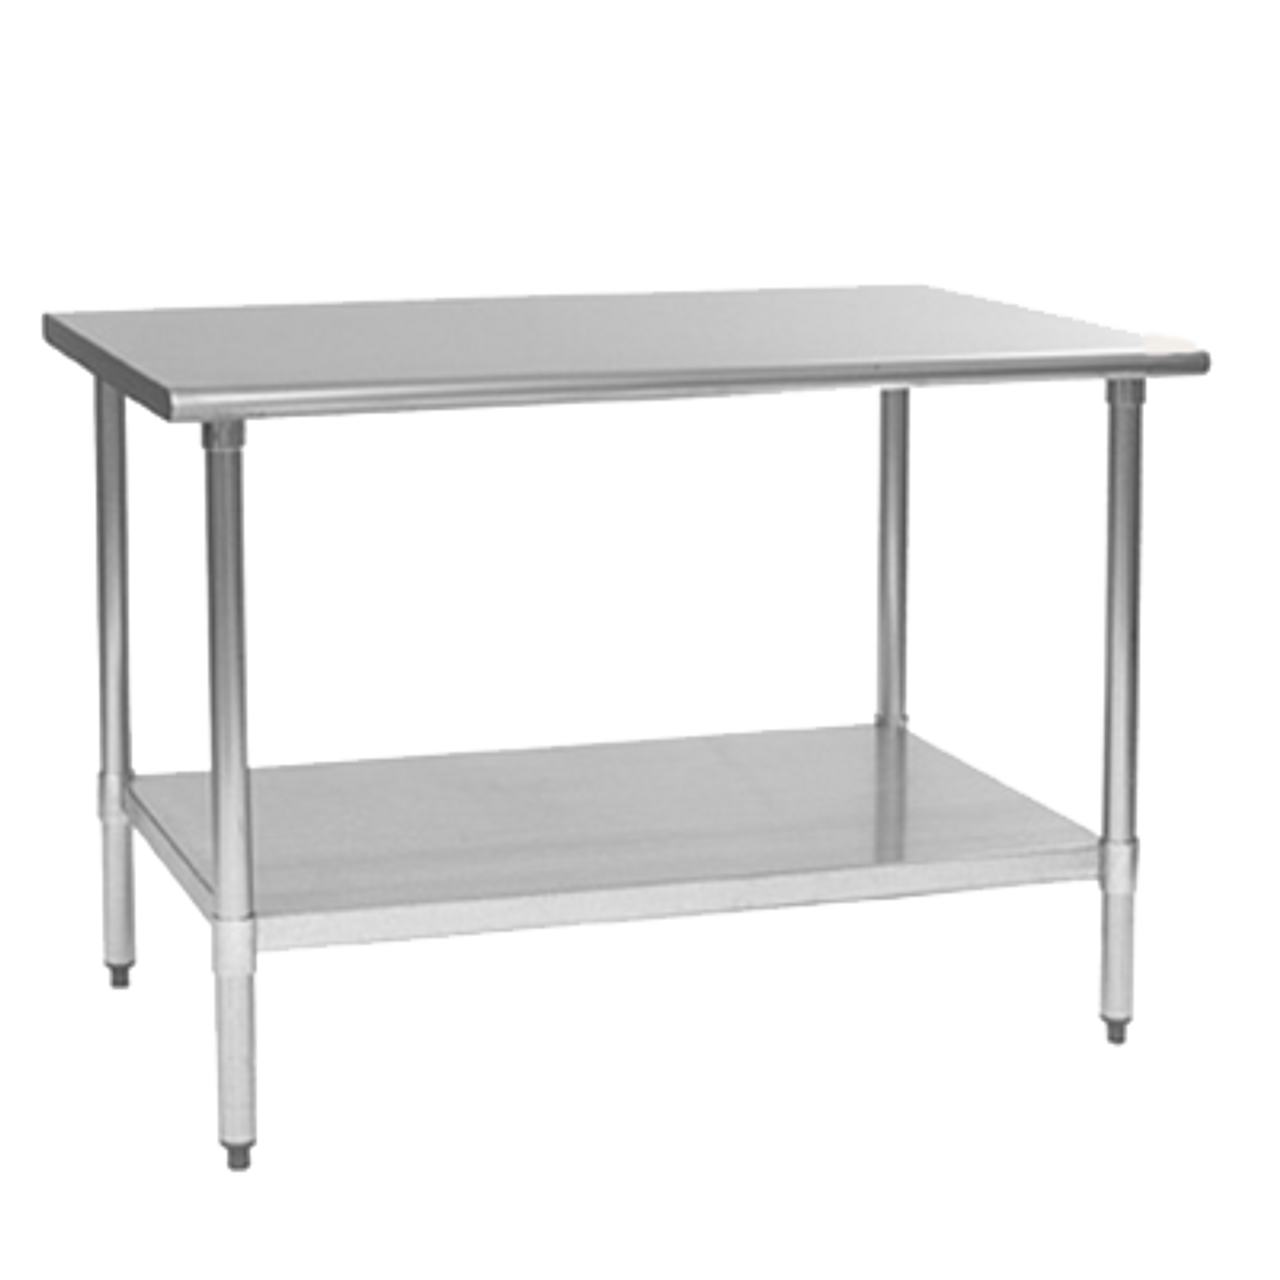 Budget Series Work Table, 72"W x 24"D, 430 stainless steel top, rolled edge on front & back, adjustable galvanized undershelf, Uni-Lok® gusset system, (4) galvanized legs with adjustable plastic bullet feet, NSF